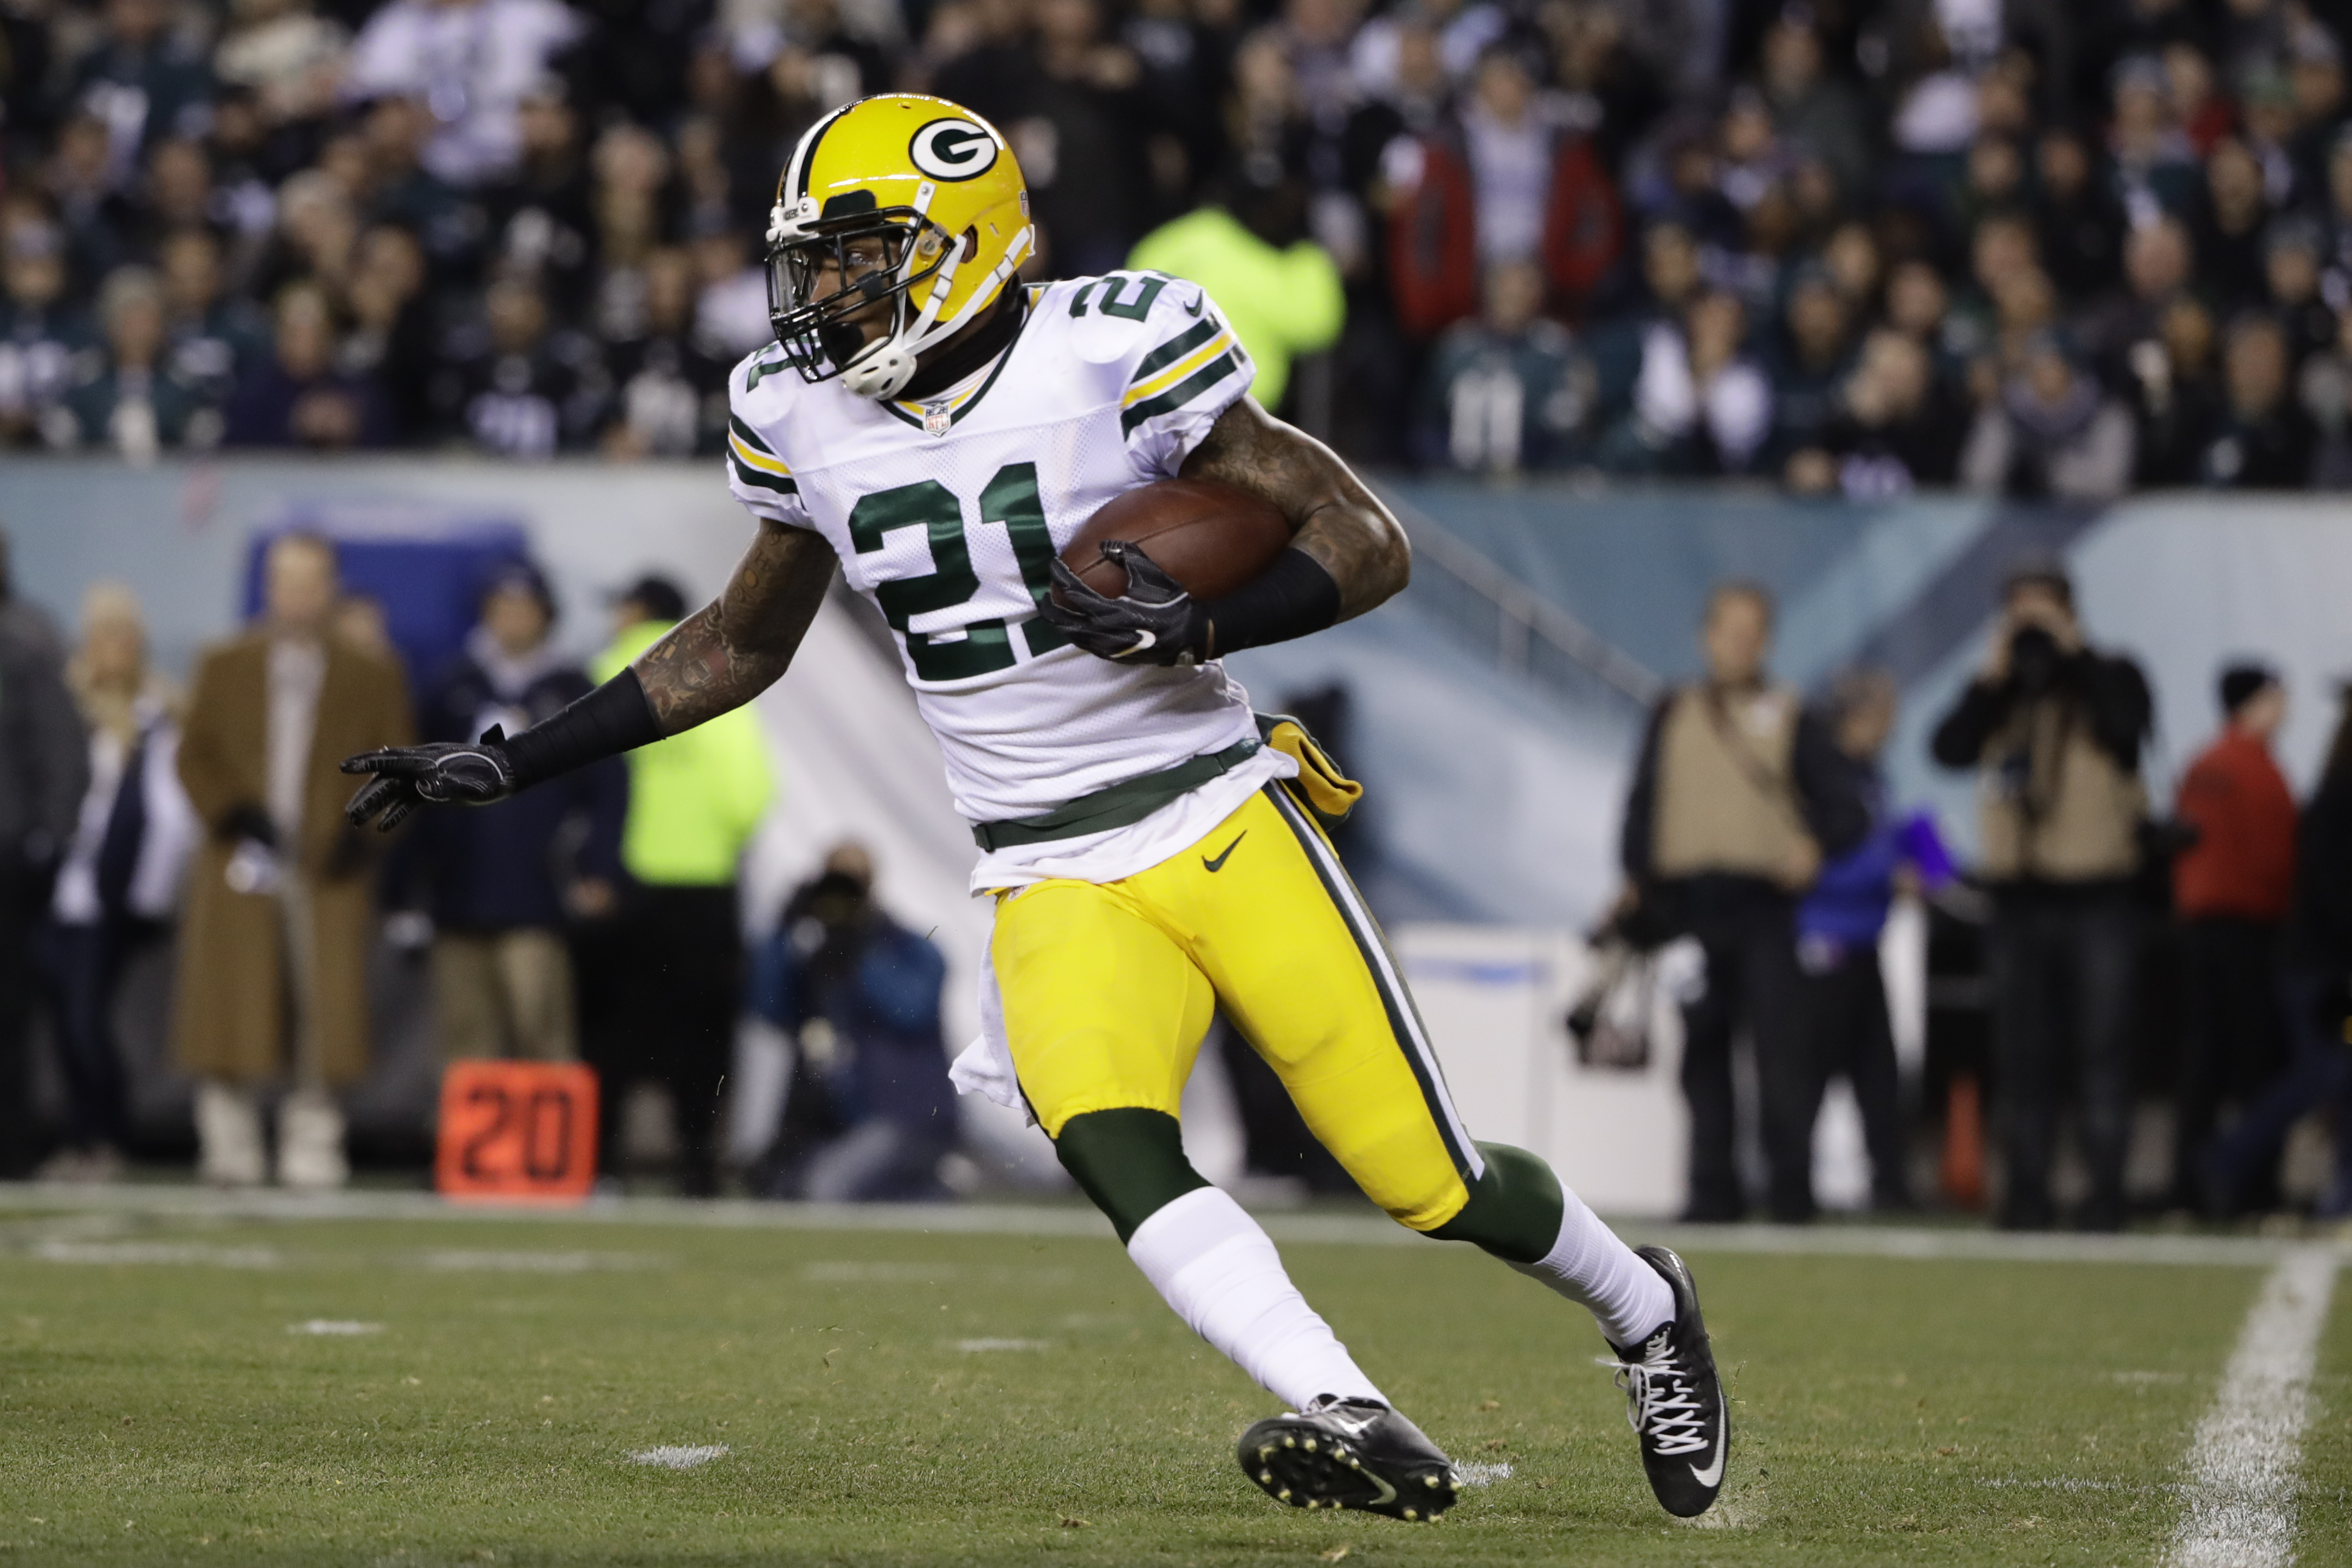 Ha Ha Clinton-Dix to retire with the Packers